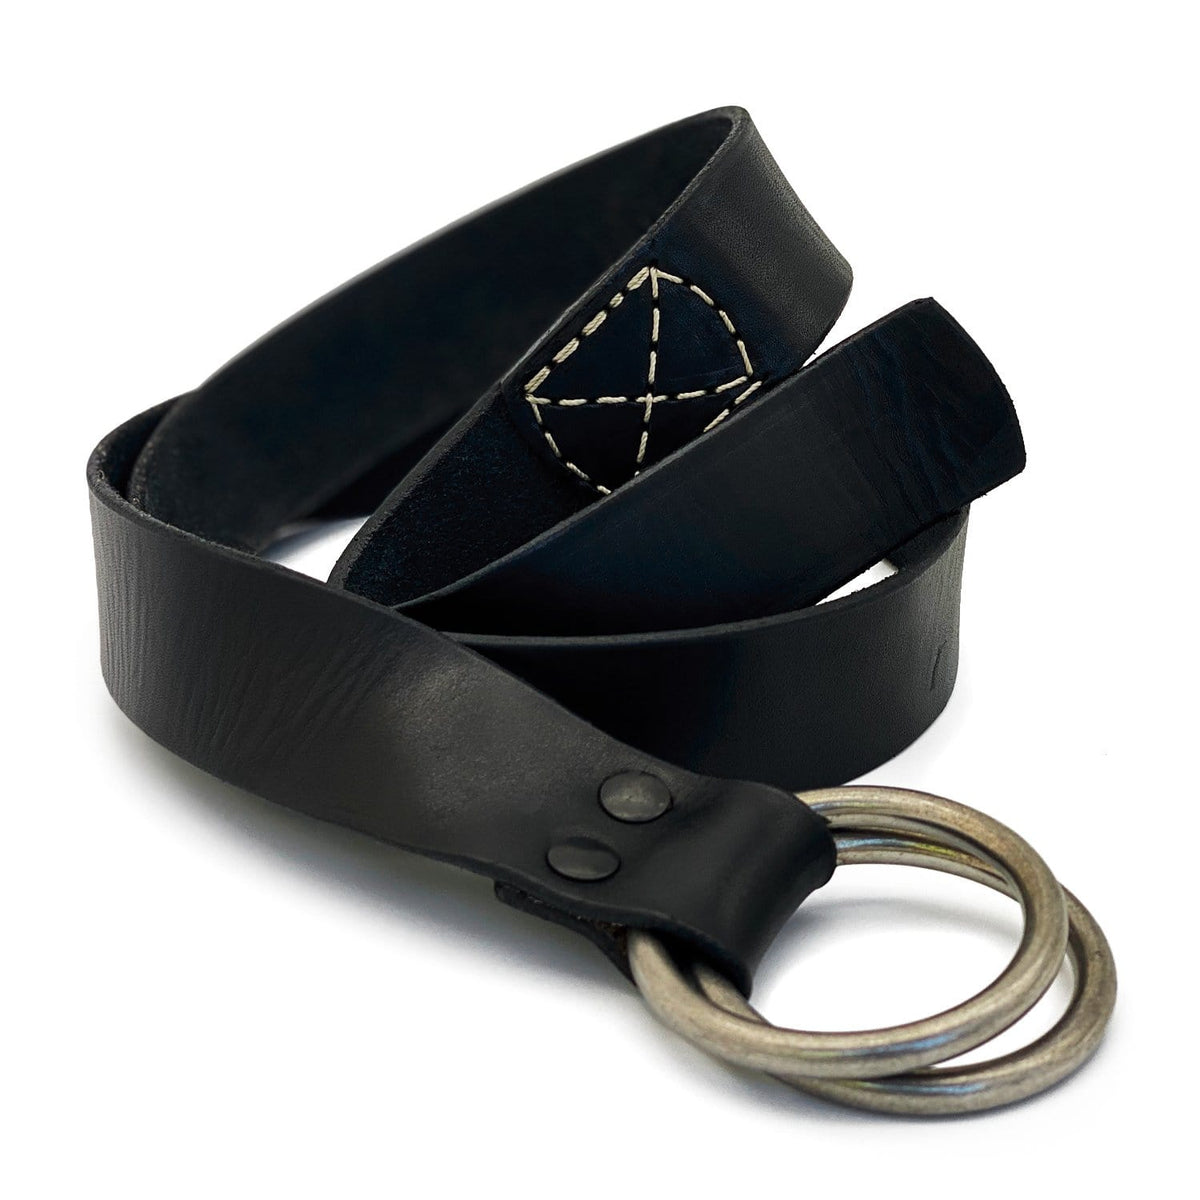 The SAUSALITO Black Double Ring Classic Leather Belt | Scottsdale